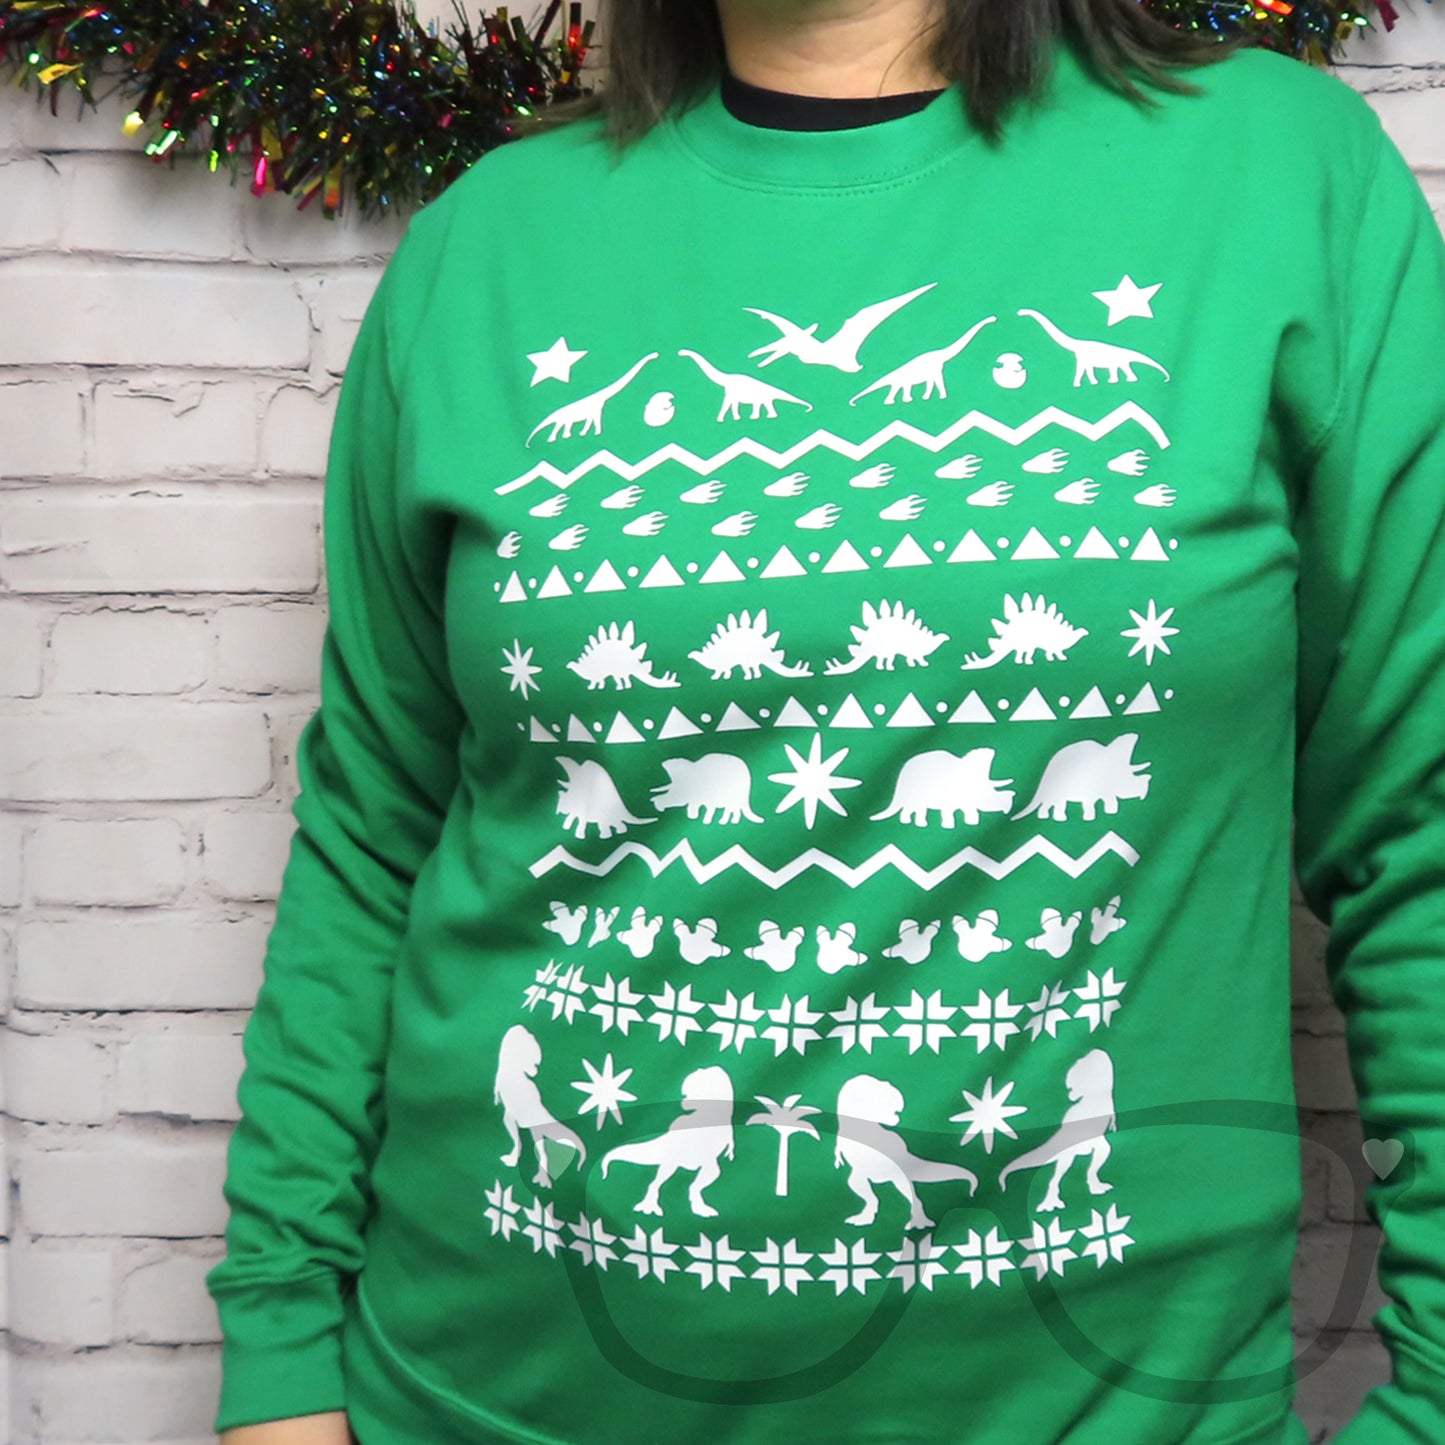 A Green sweater being worn to show the full design of the rows of dinosaurs and shapes to mimic a Christmas sweater design